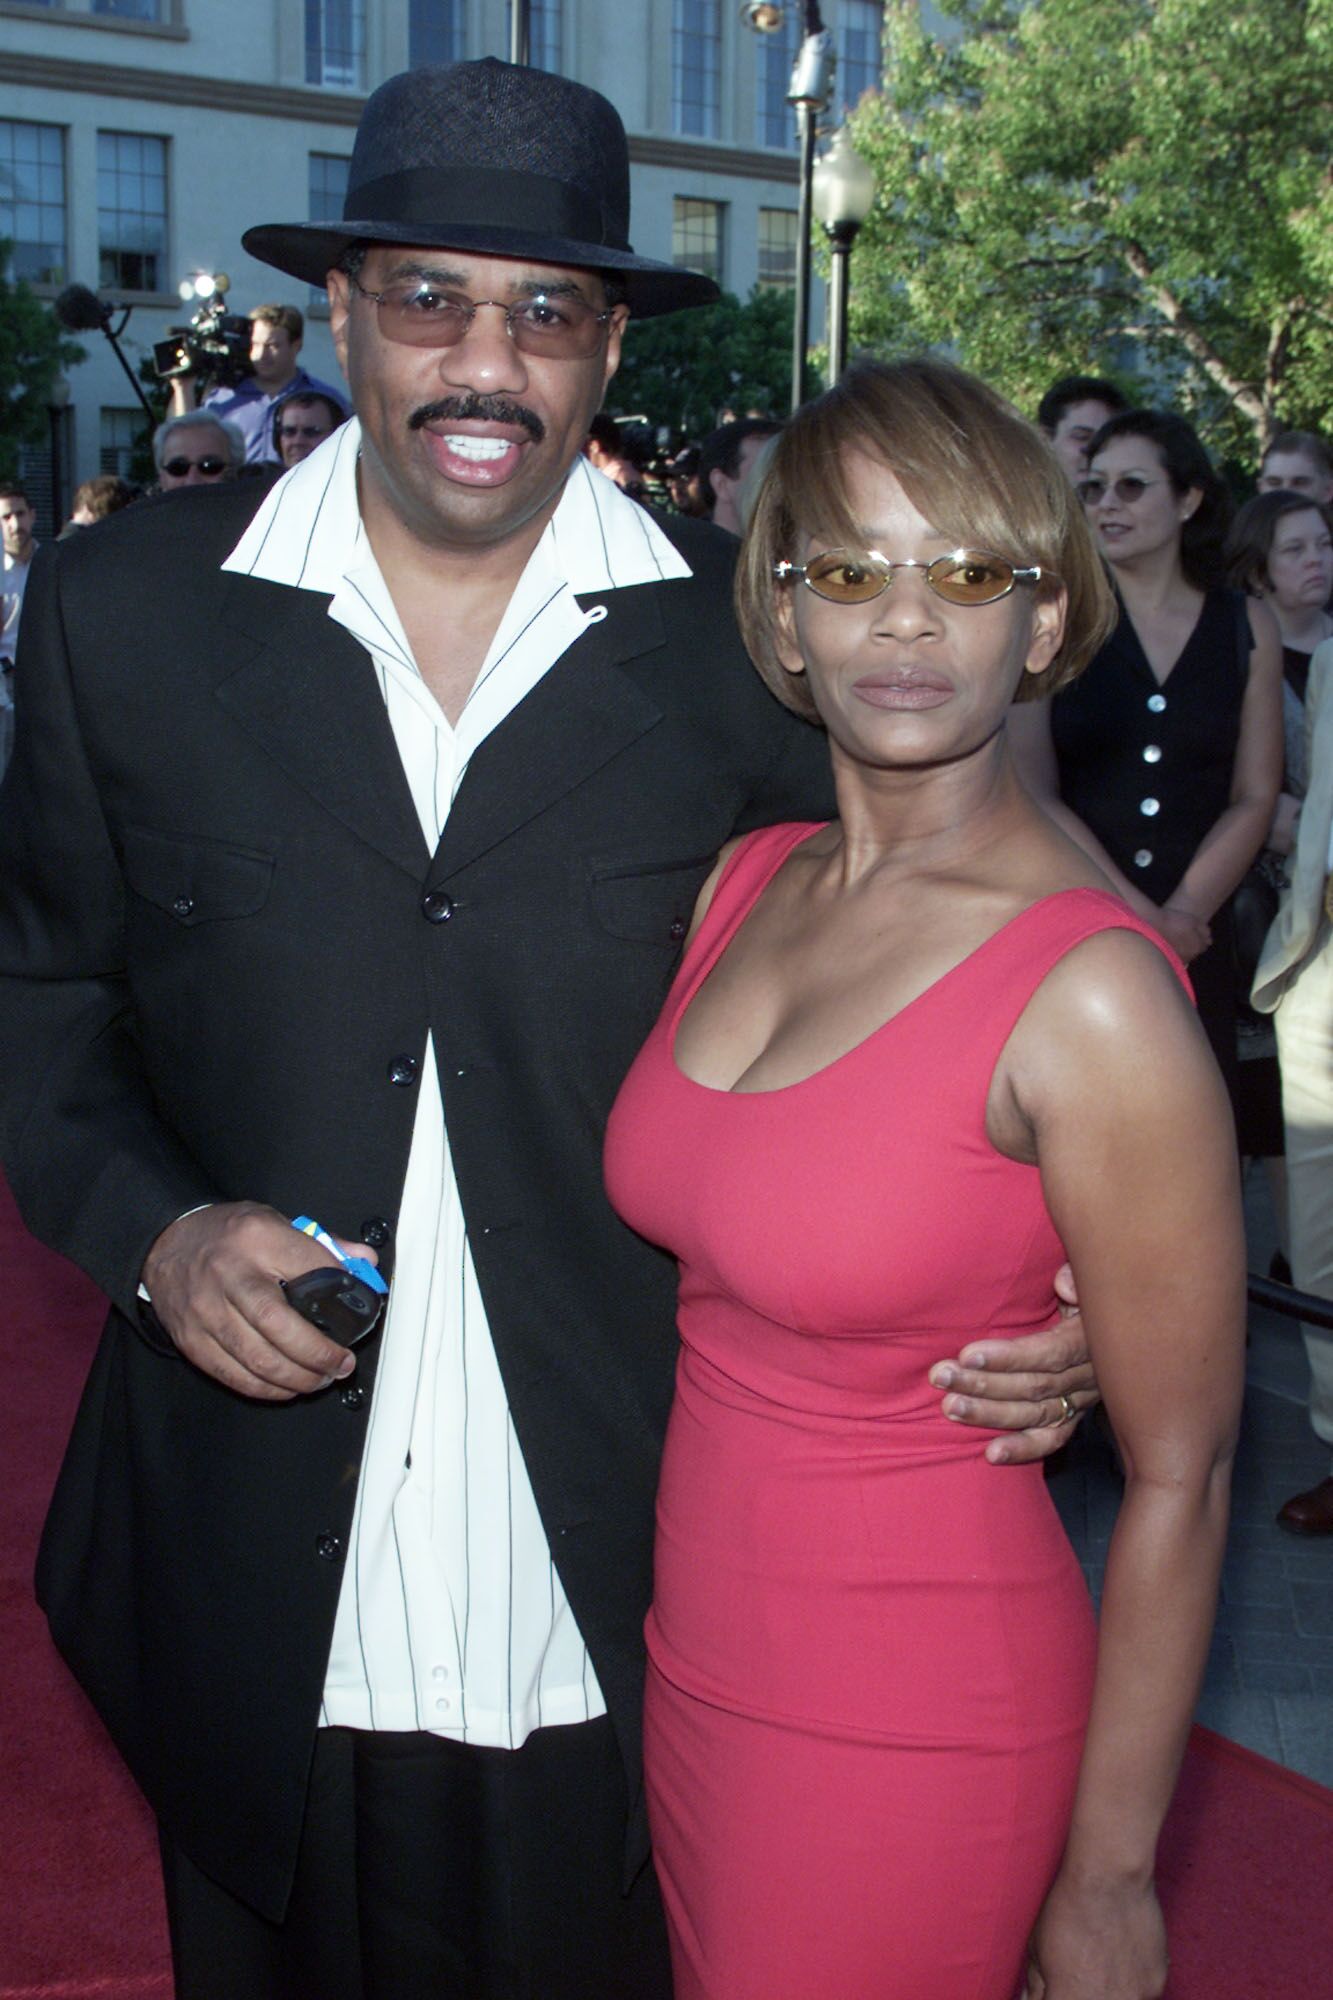 Steve Harvey and Mary Lee Harvey at the premiere of "The Score" at the Paramount Theater in Los Angeles. | Source: Getty Images